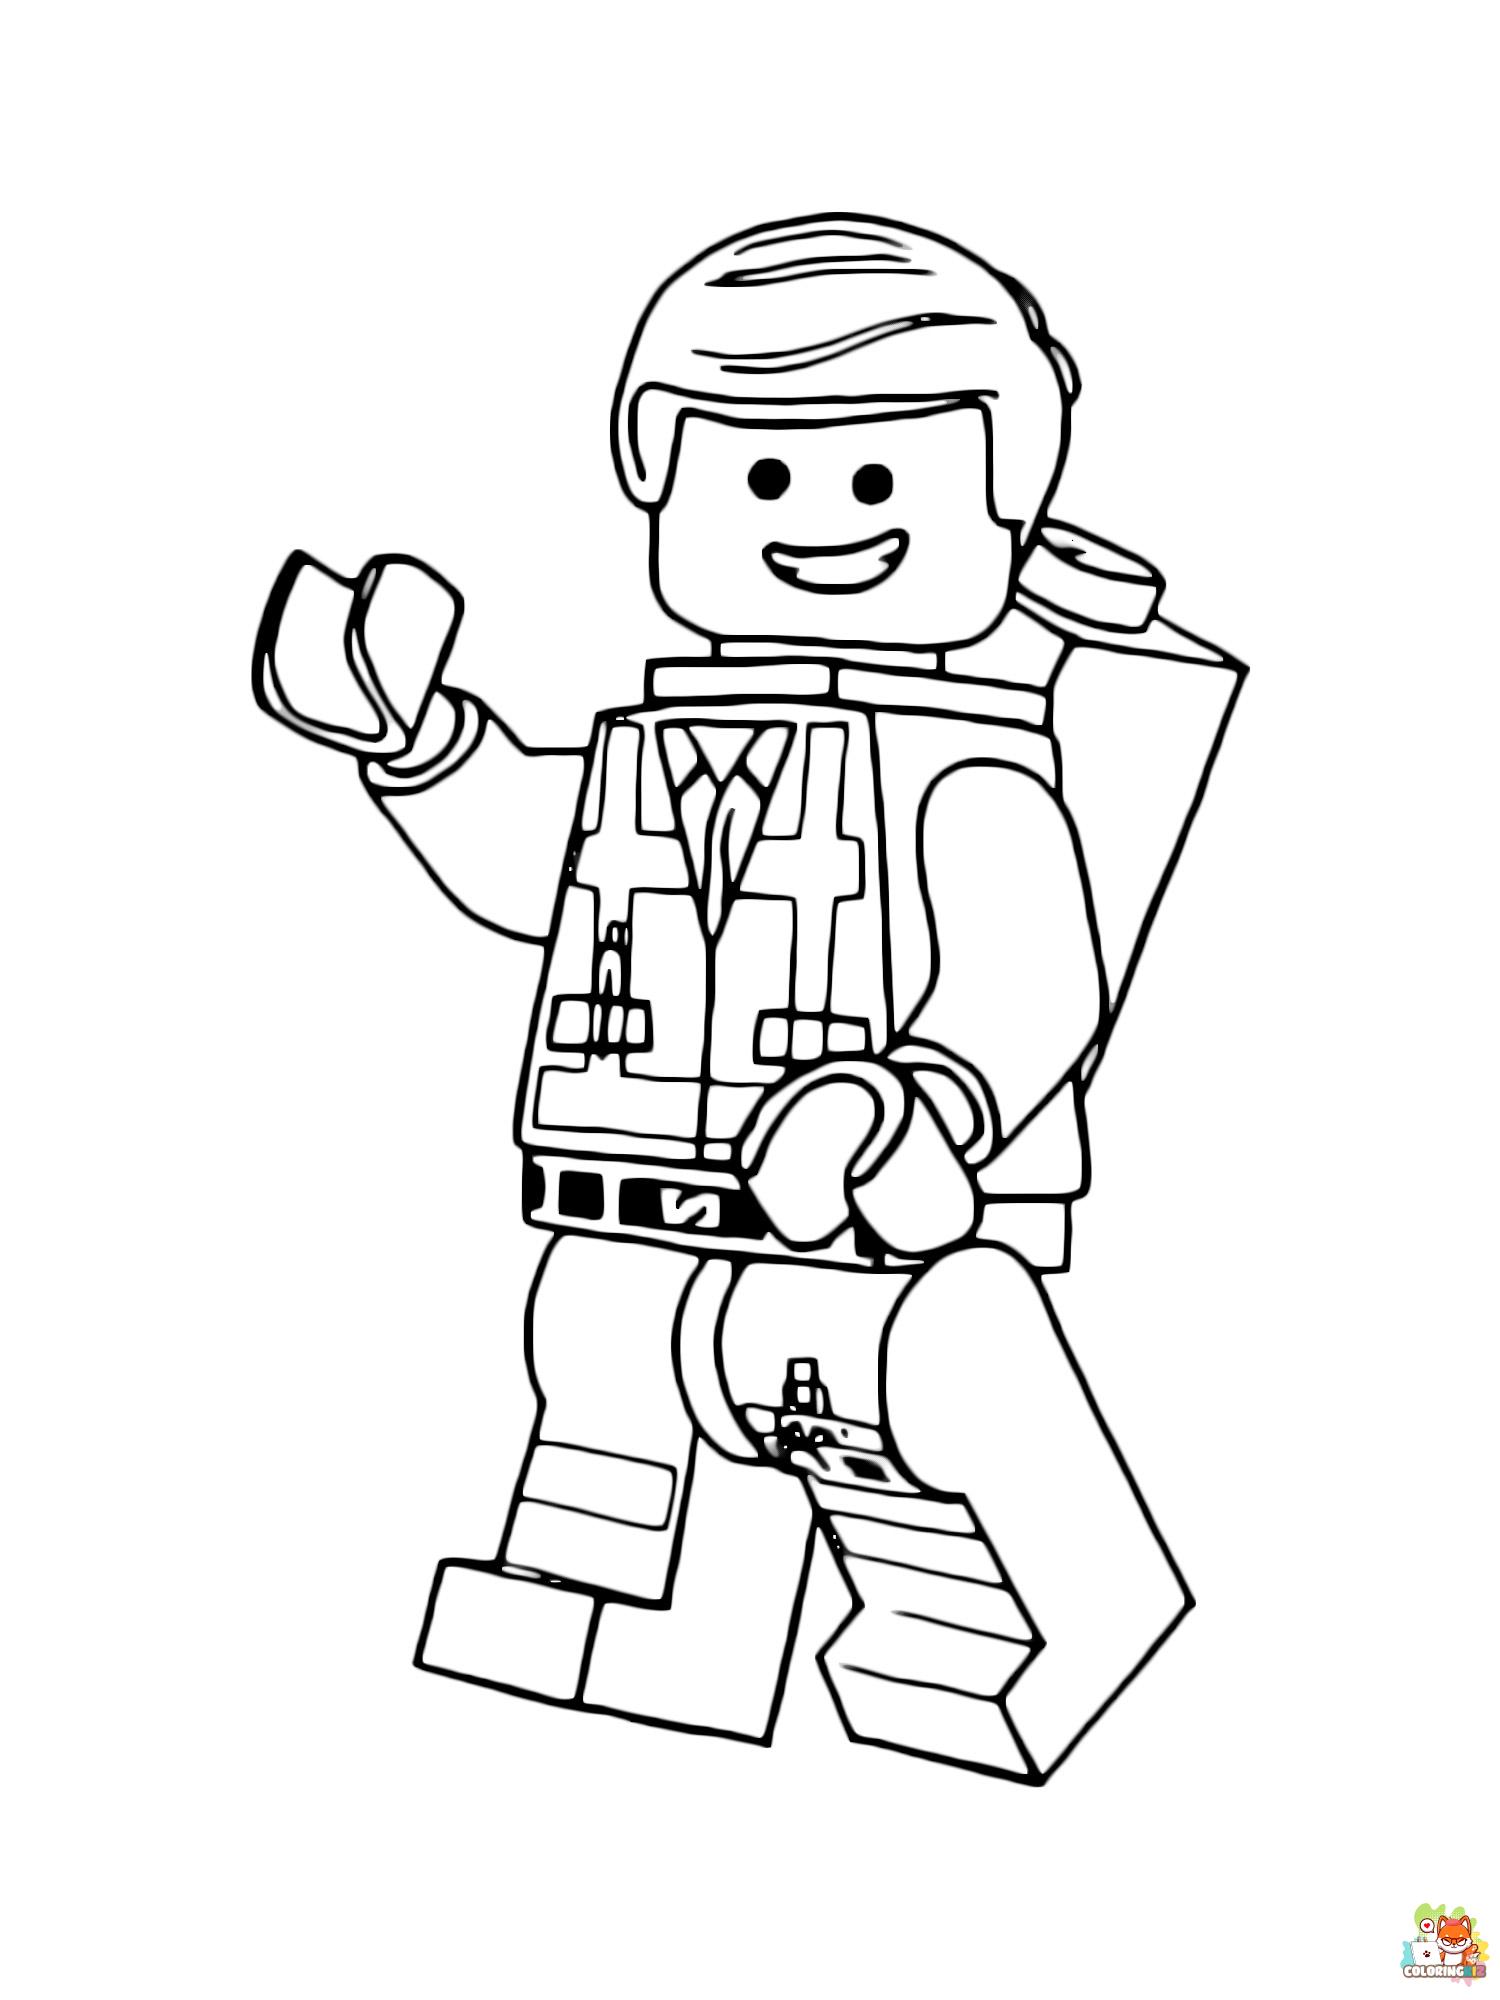 Lego Movie Coloring Pages free